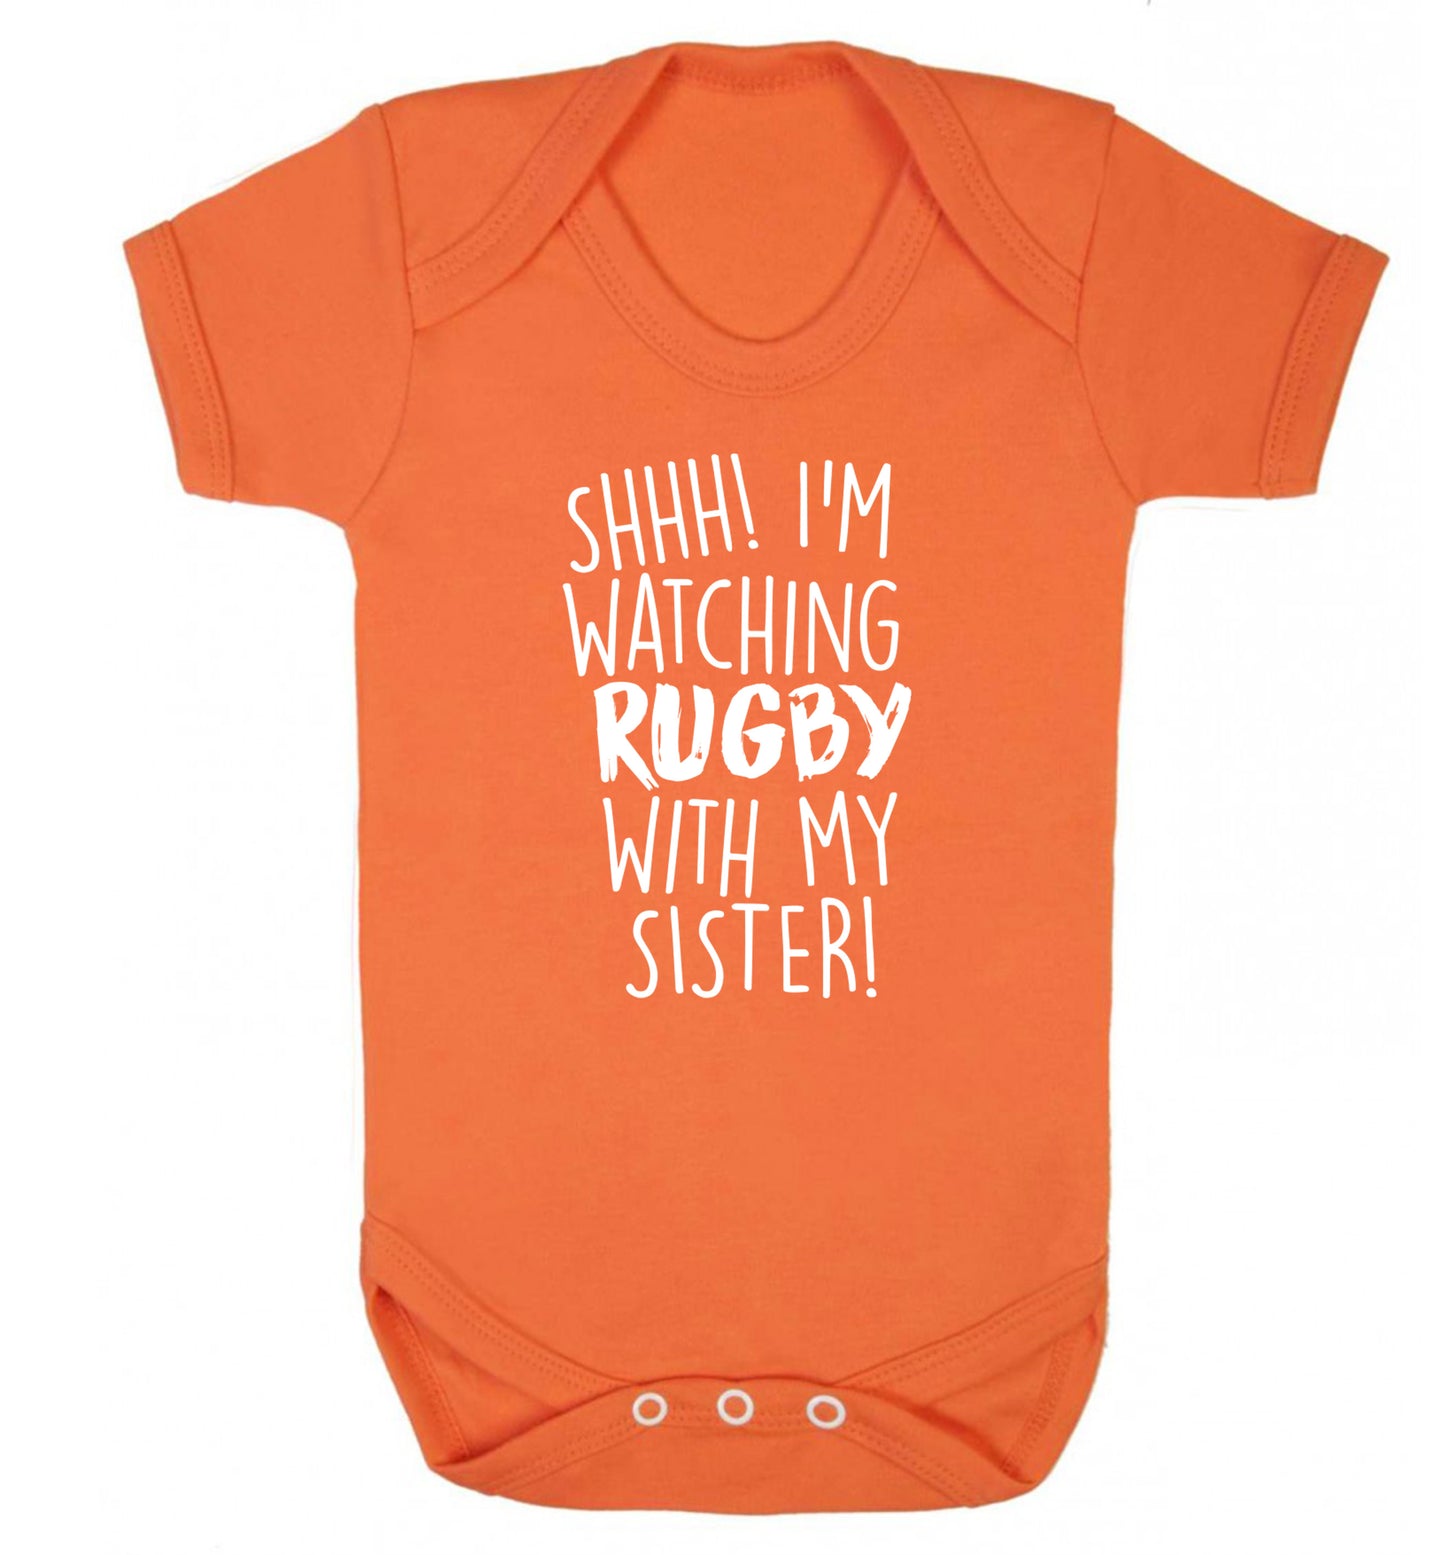 Shh... I'm watching rugby with my sister Baby Vest orange 18-24 months